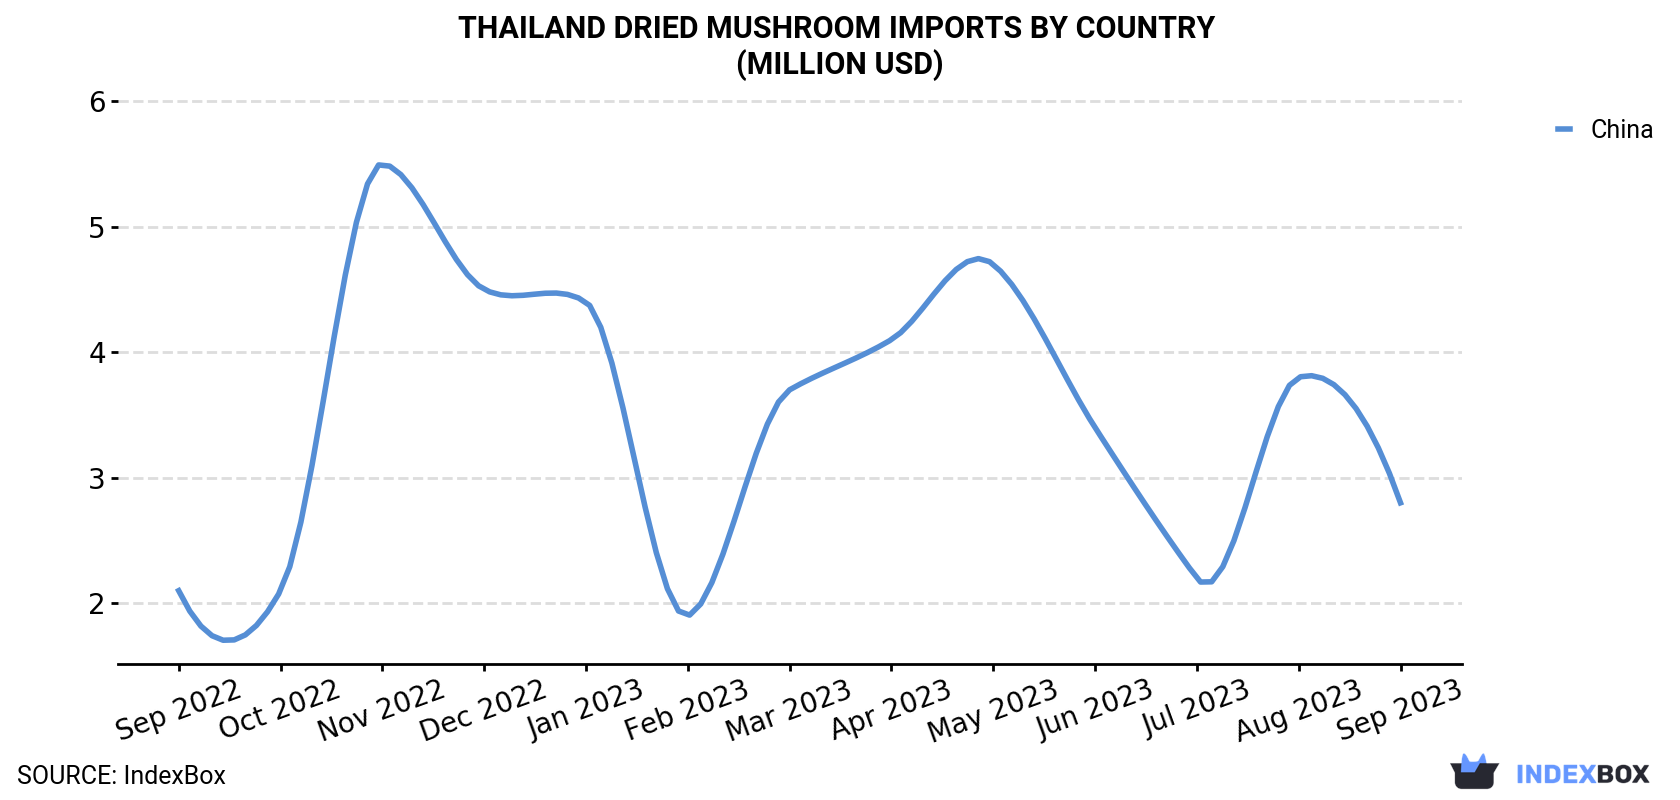 Thailand Dried Mushroom Imports By Country (Million USD)